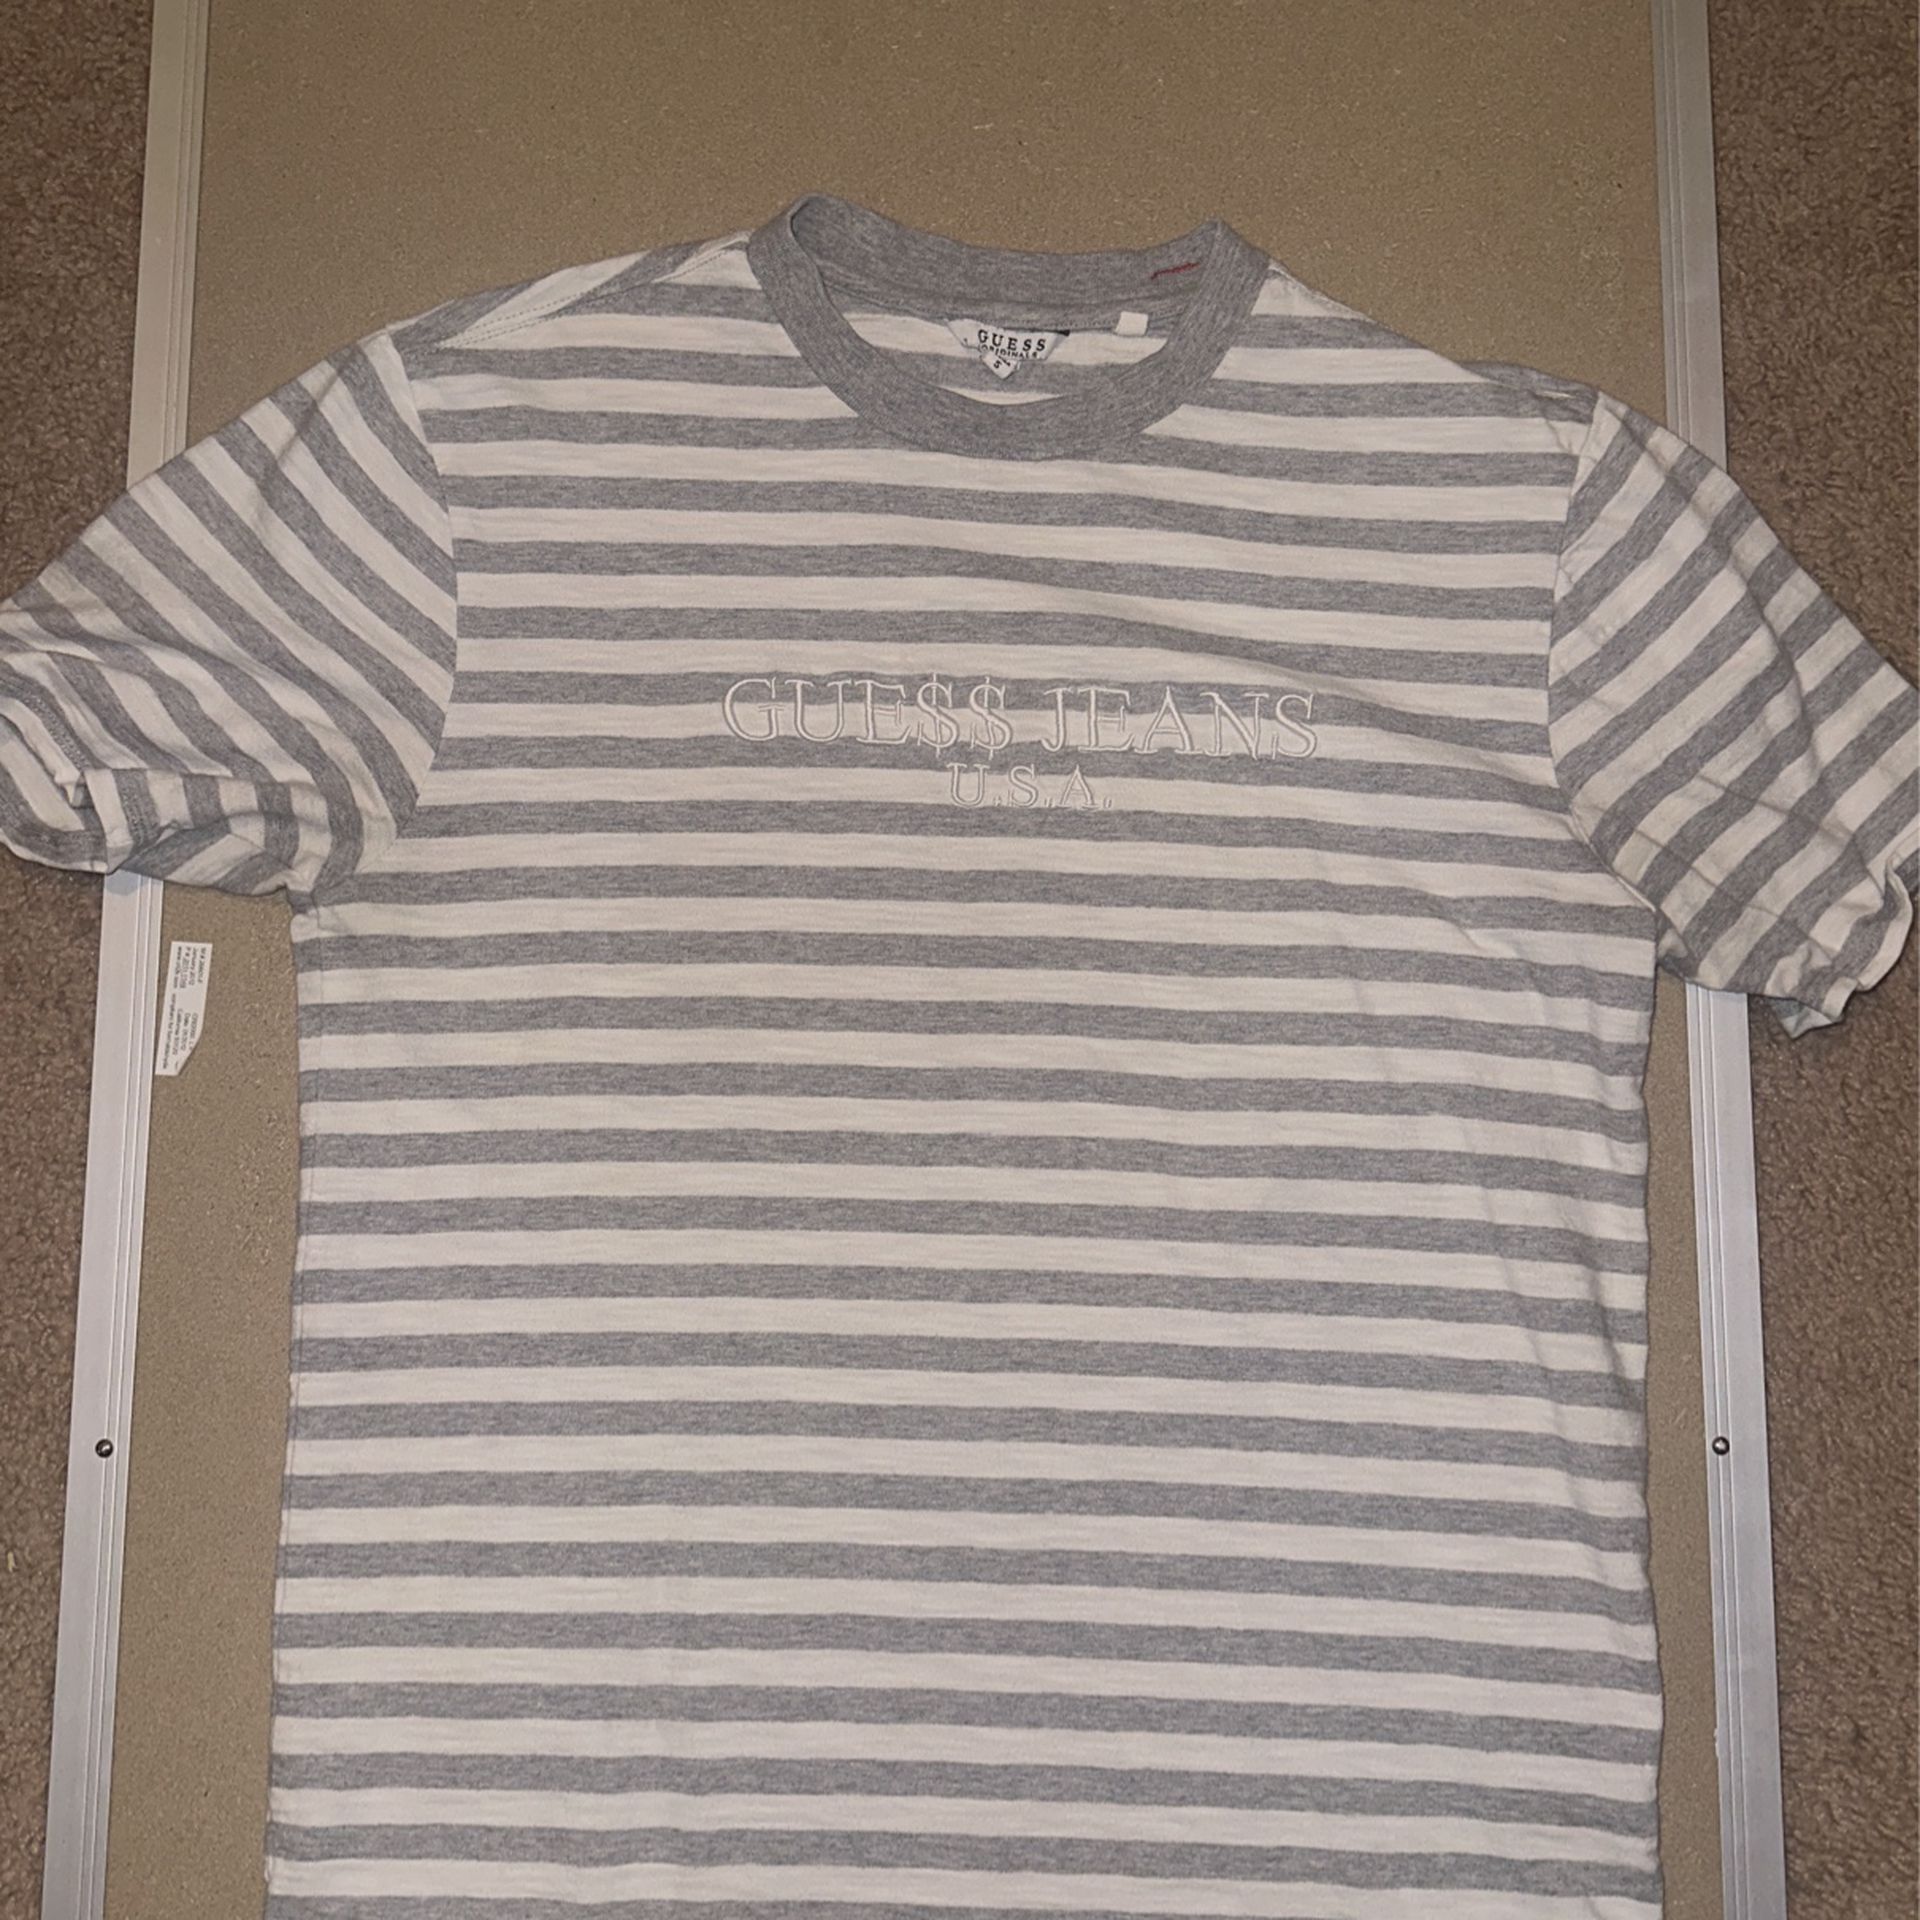 Guess jeans T Shirt (Size Small)